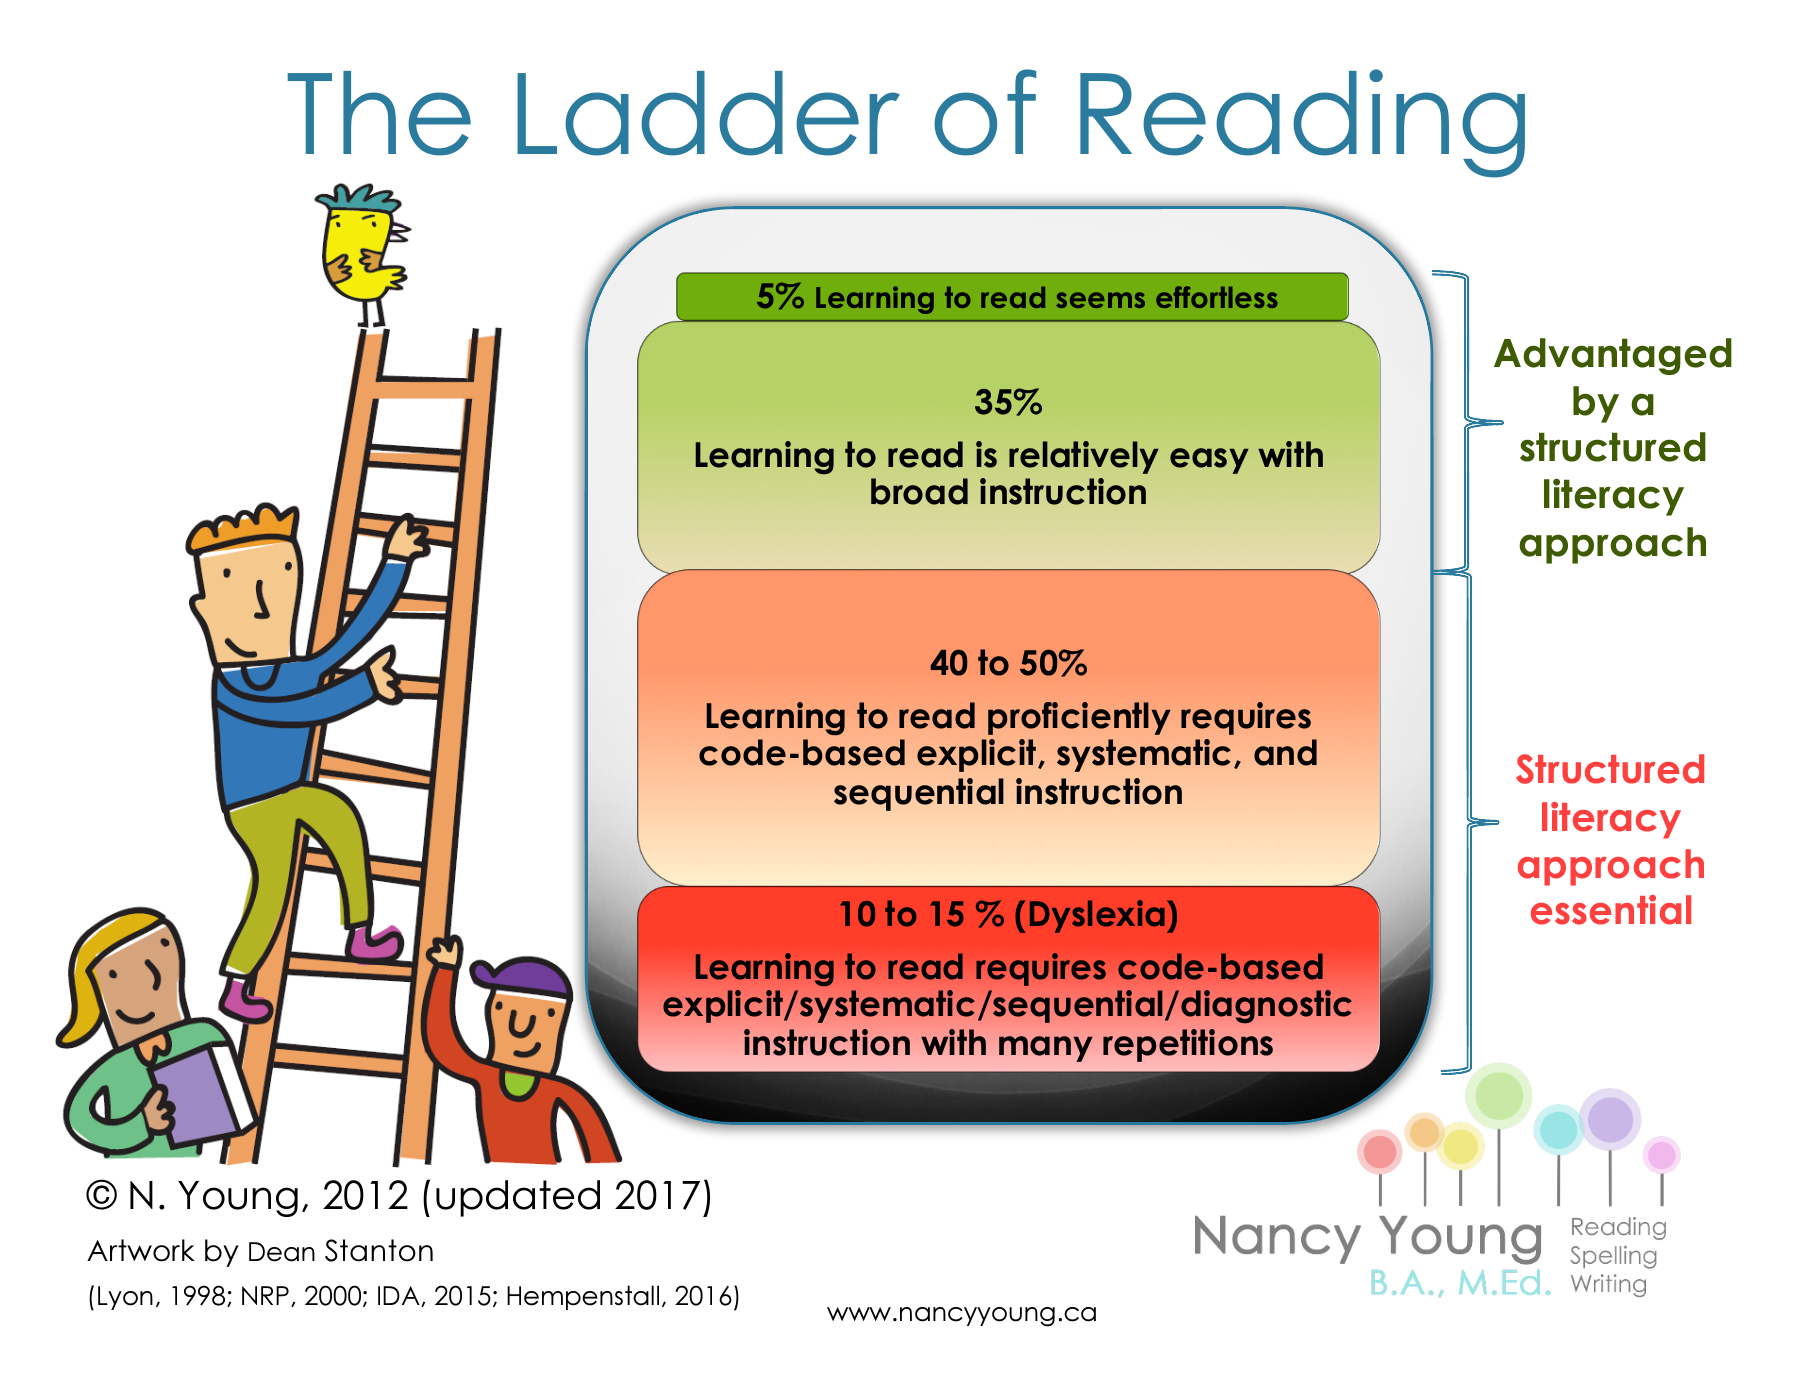 Extensive reading 6. Reading Ladders. «The Ladder» 1986. Success Ladder in English. The Ladder of feedback.